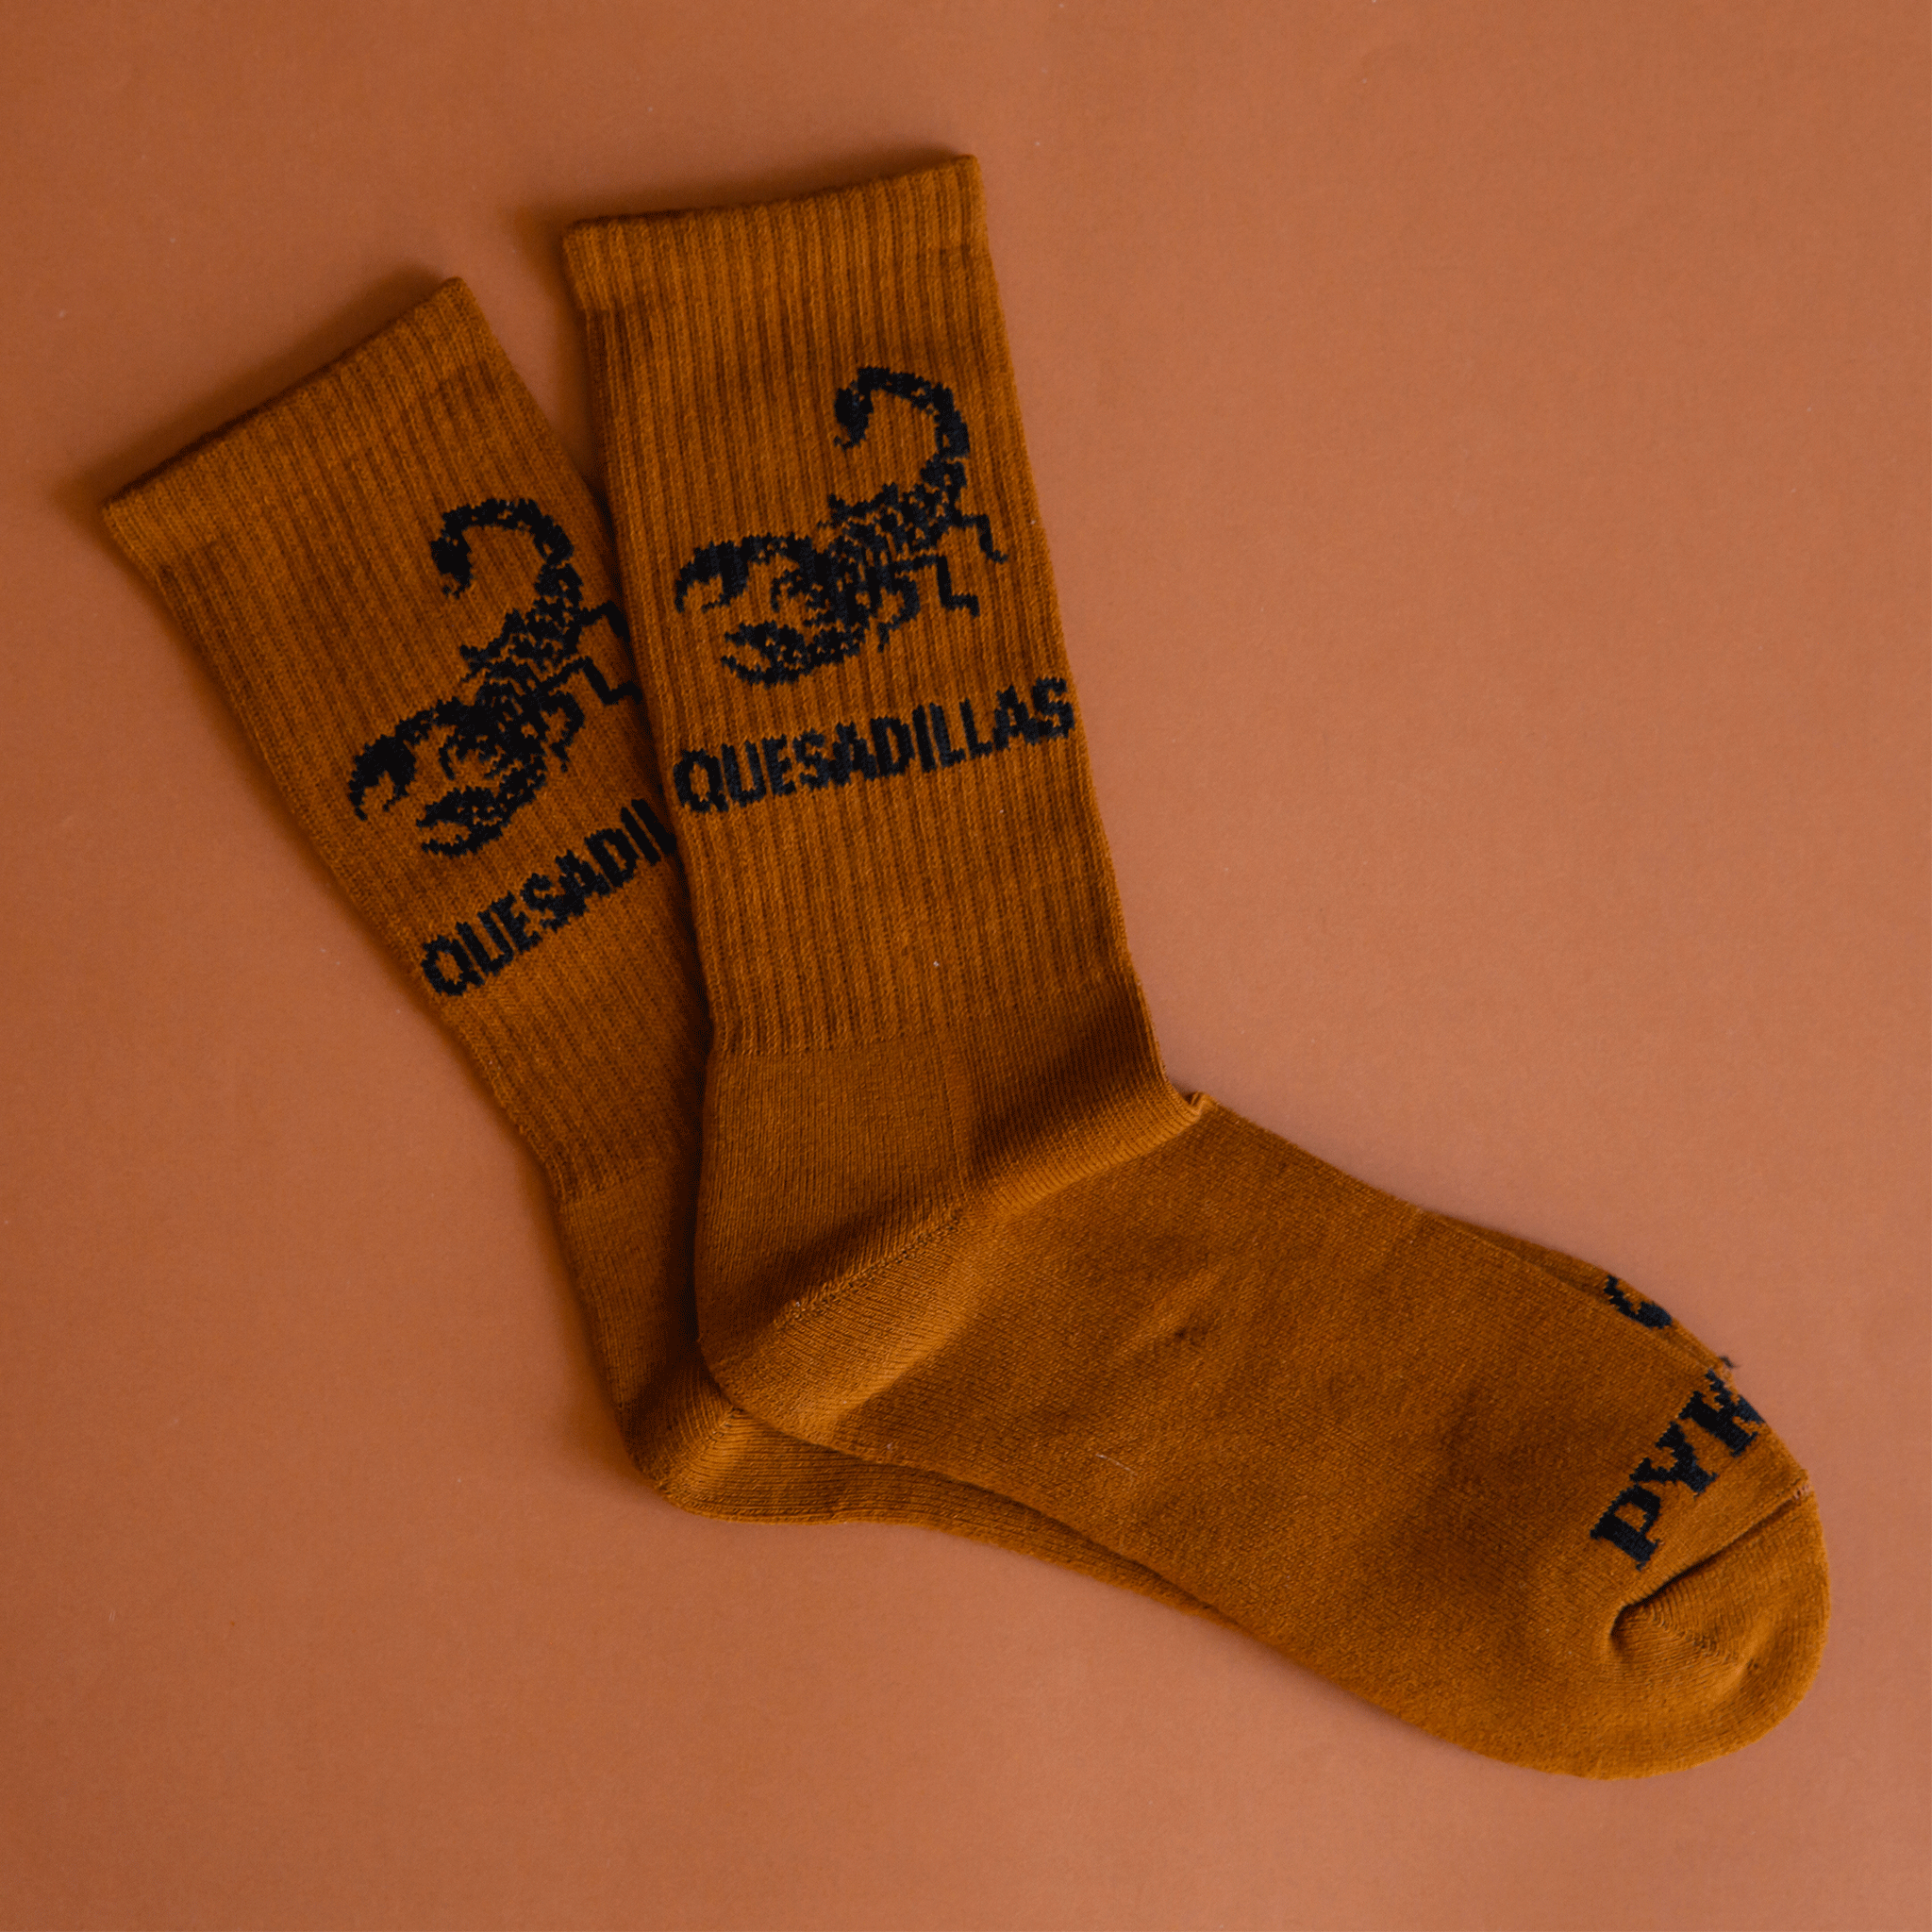 A pair of burnt orange crew socks with a black scorpion graphic and text that reads, &quot;Quesadilla&quot;.